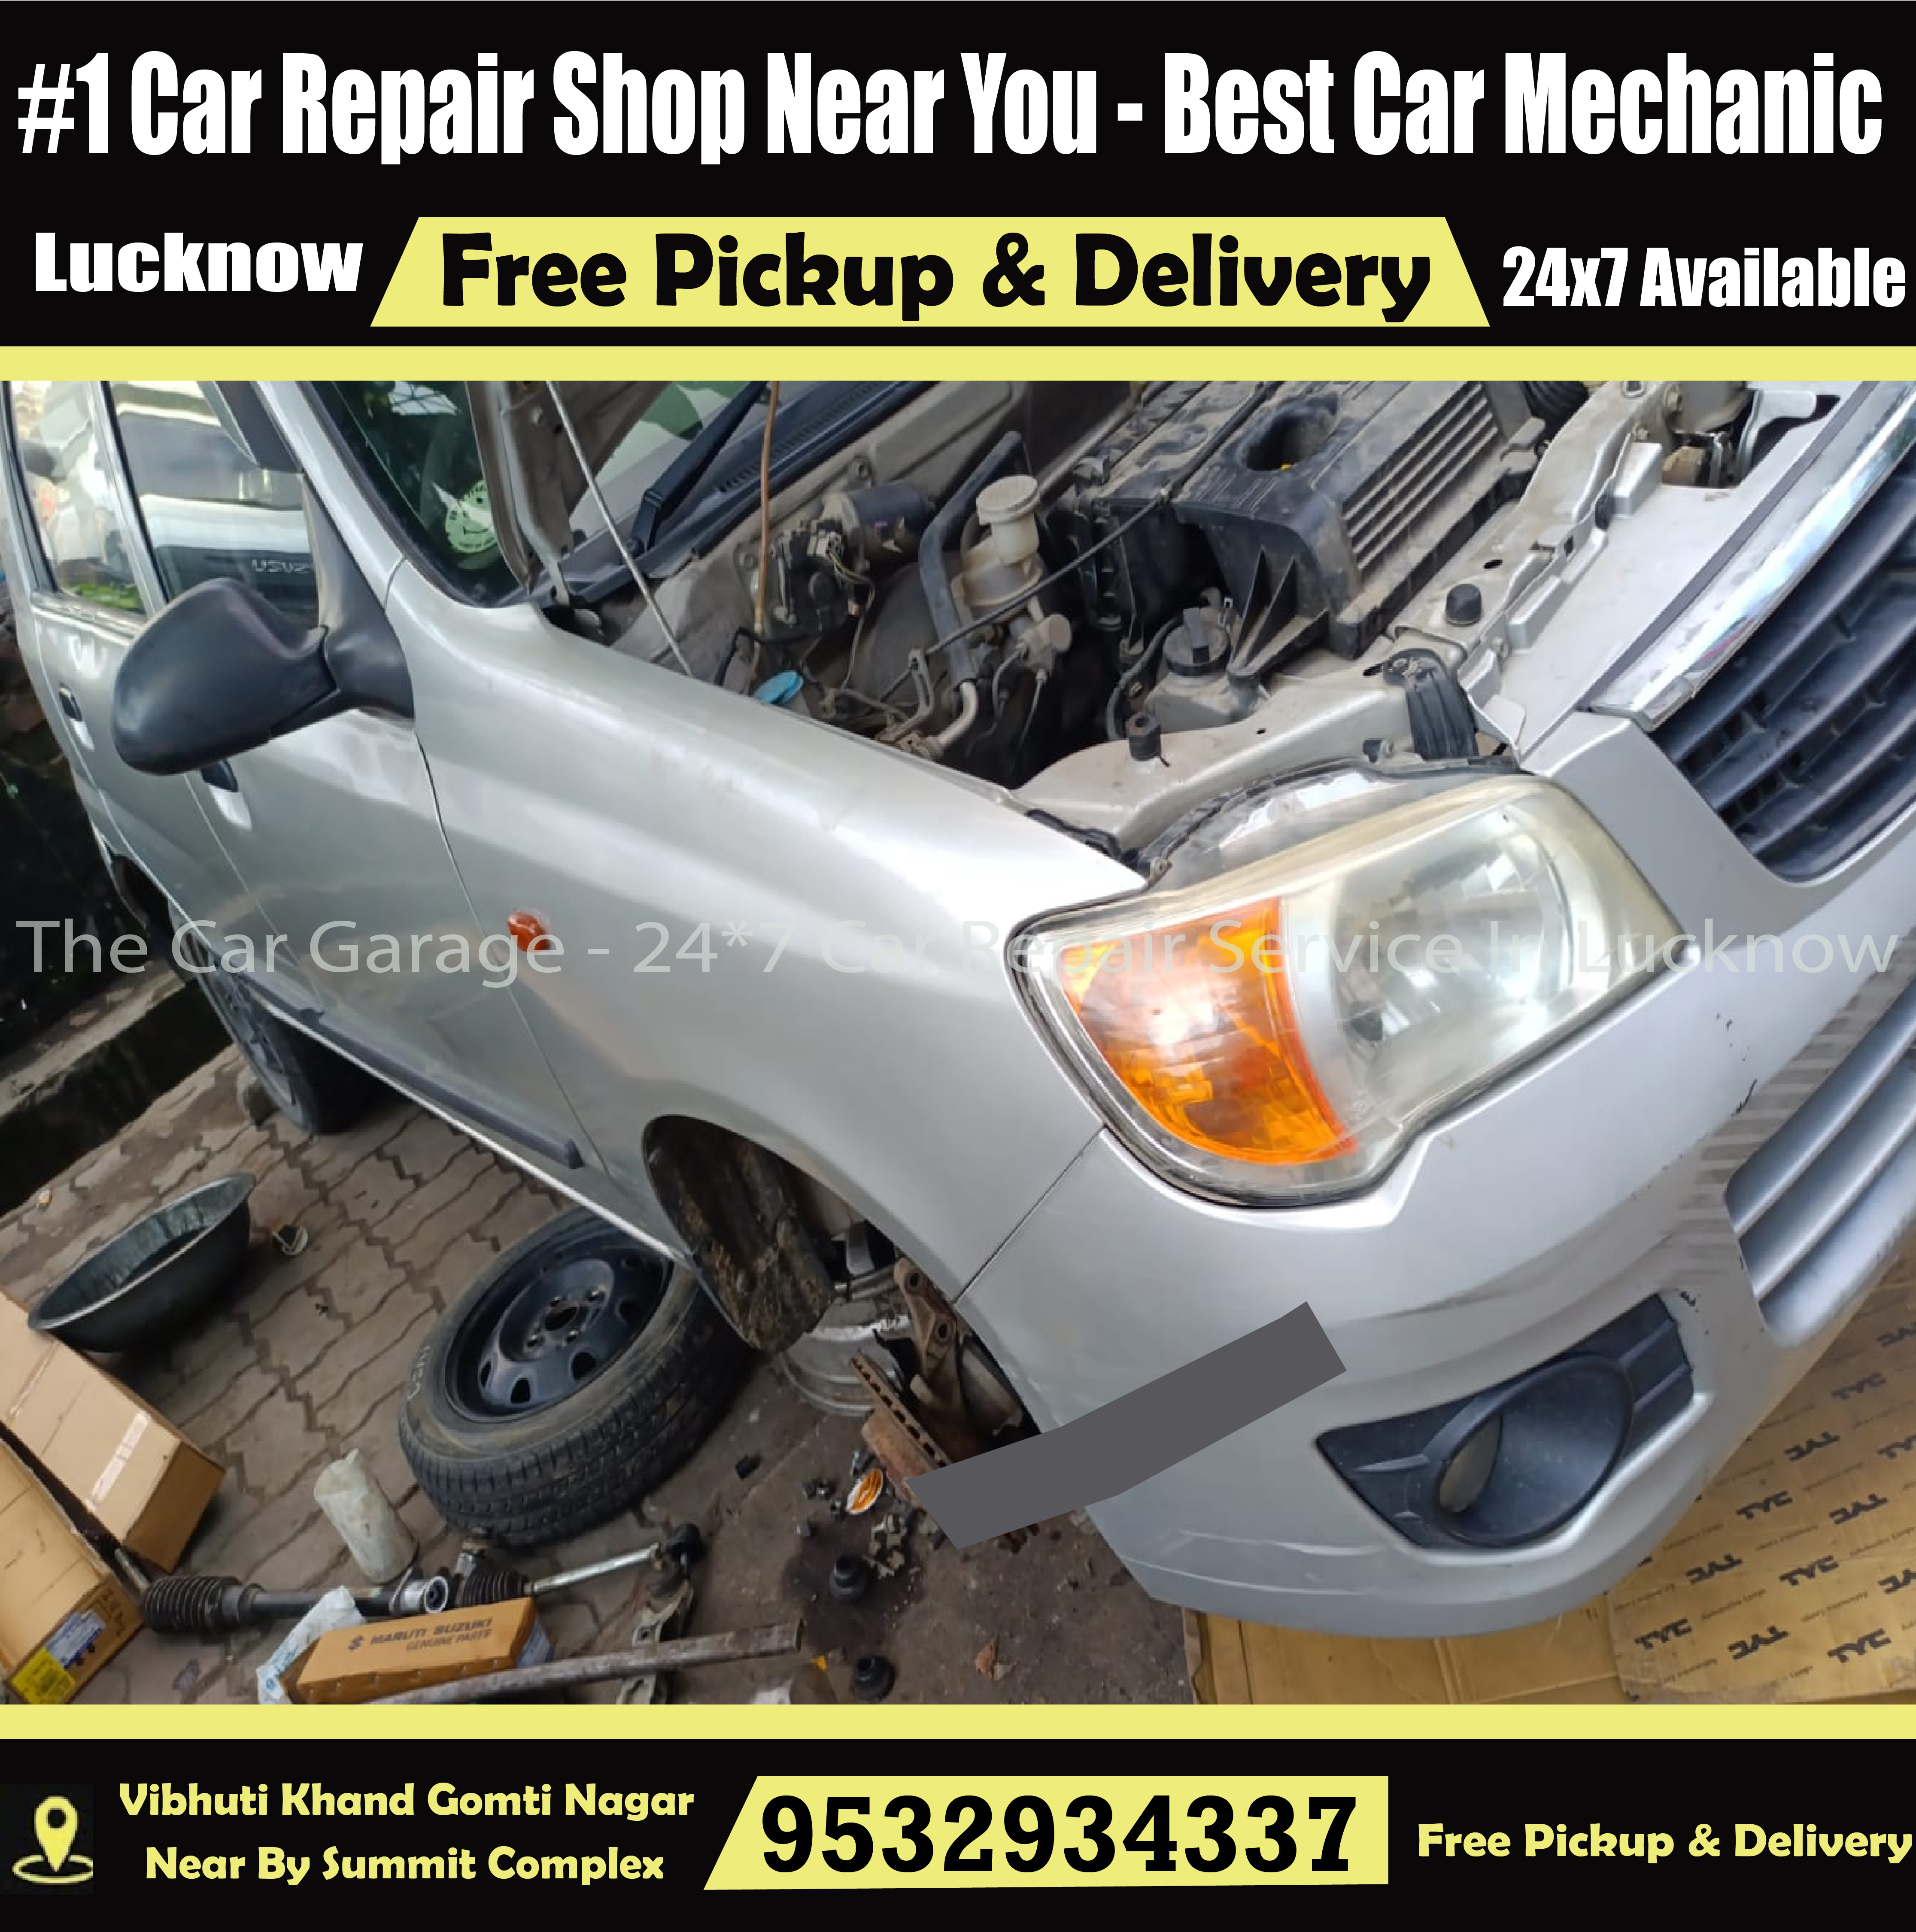 The Car Garage 24 7 Car Repair Service In Luckno in Lucknow